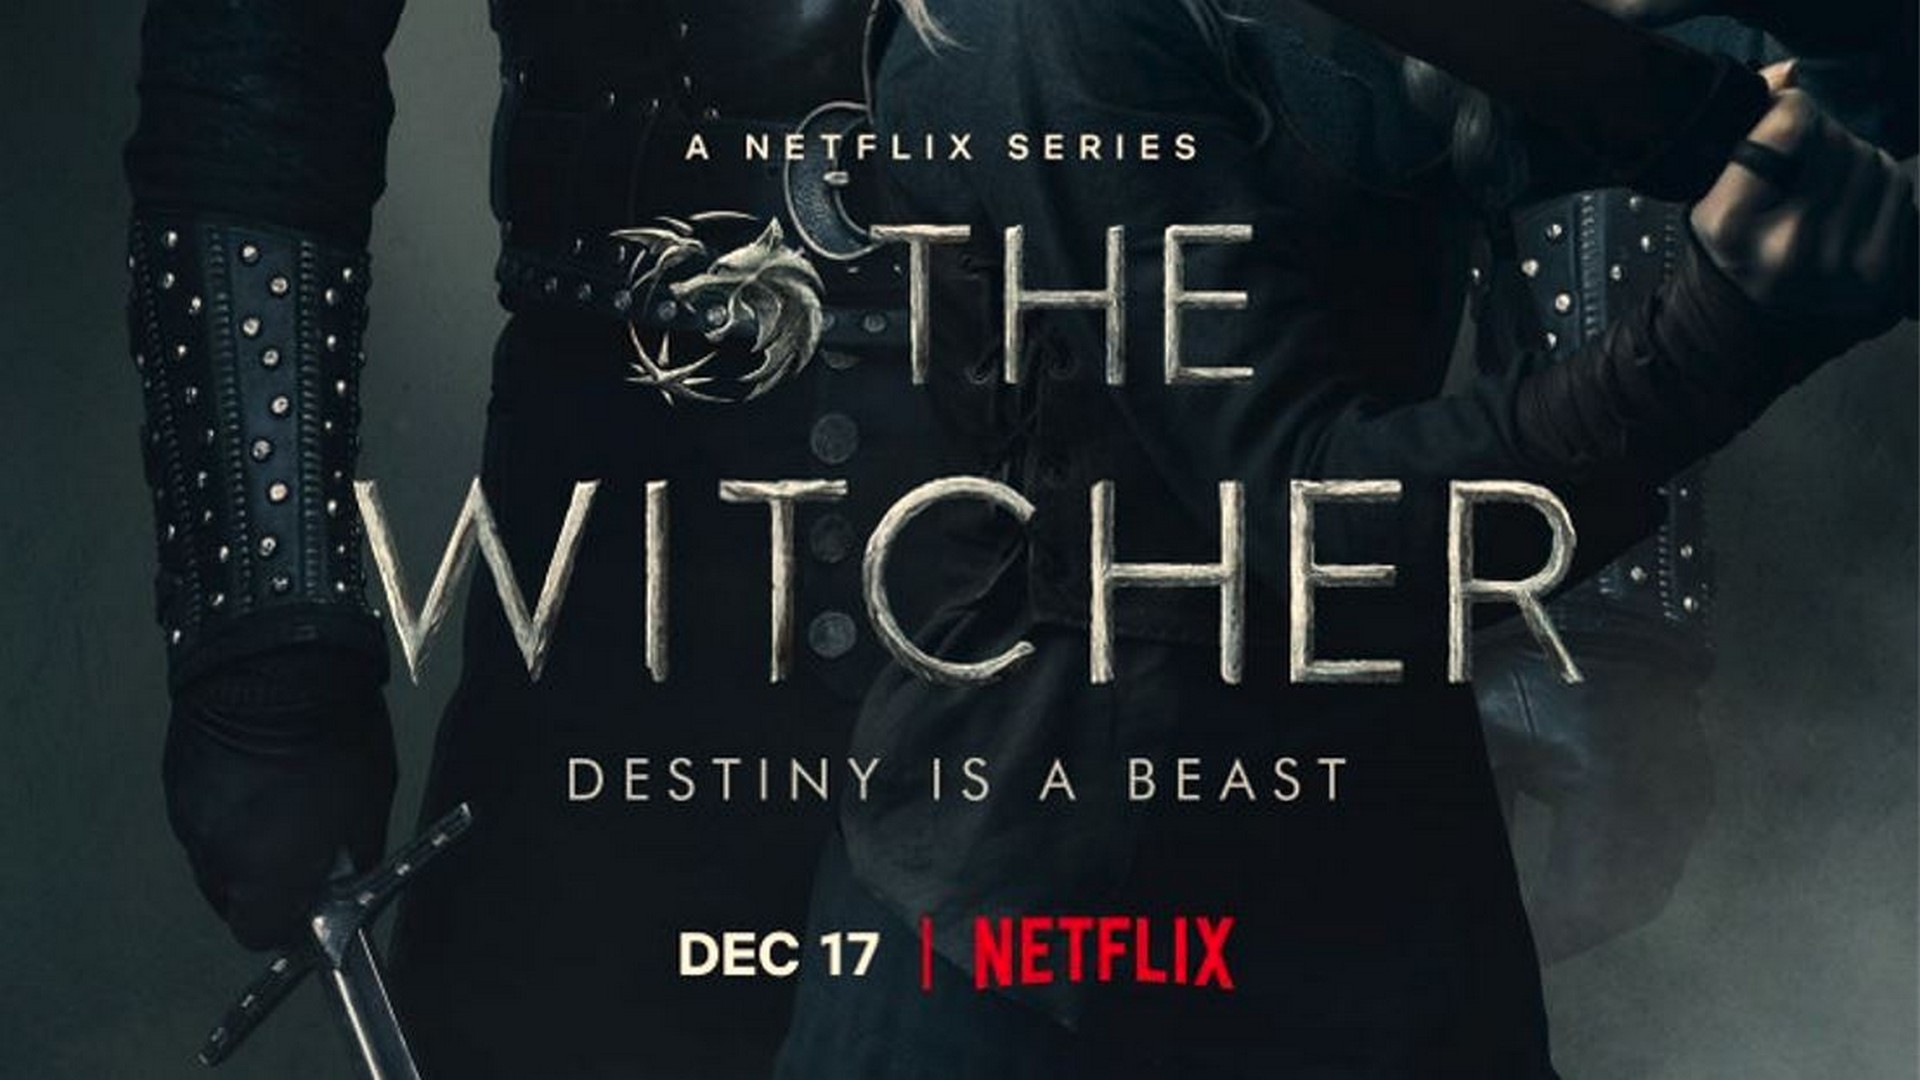 The Witcher Season 2 Trailer and Key Art Debut On Netflix December 17